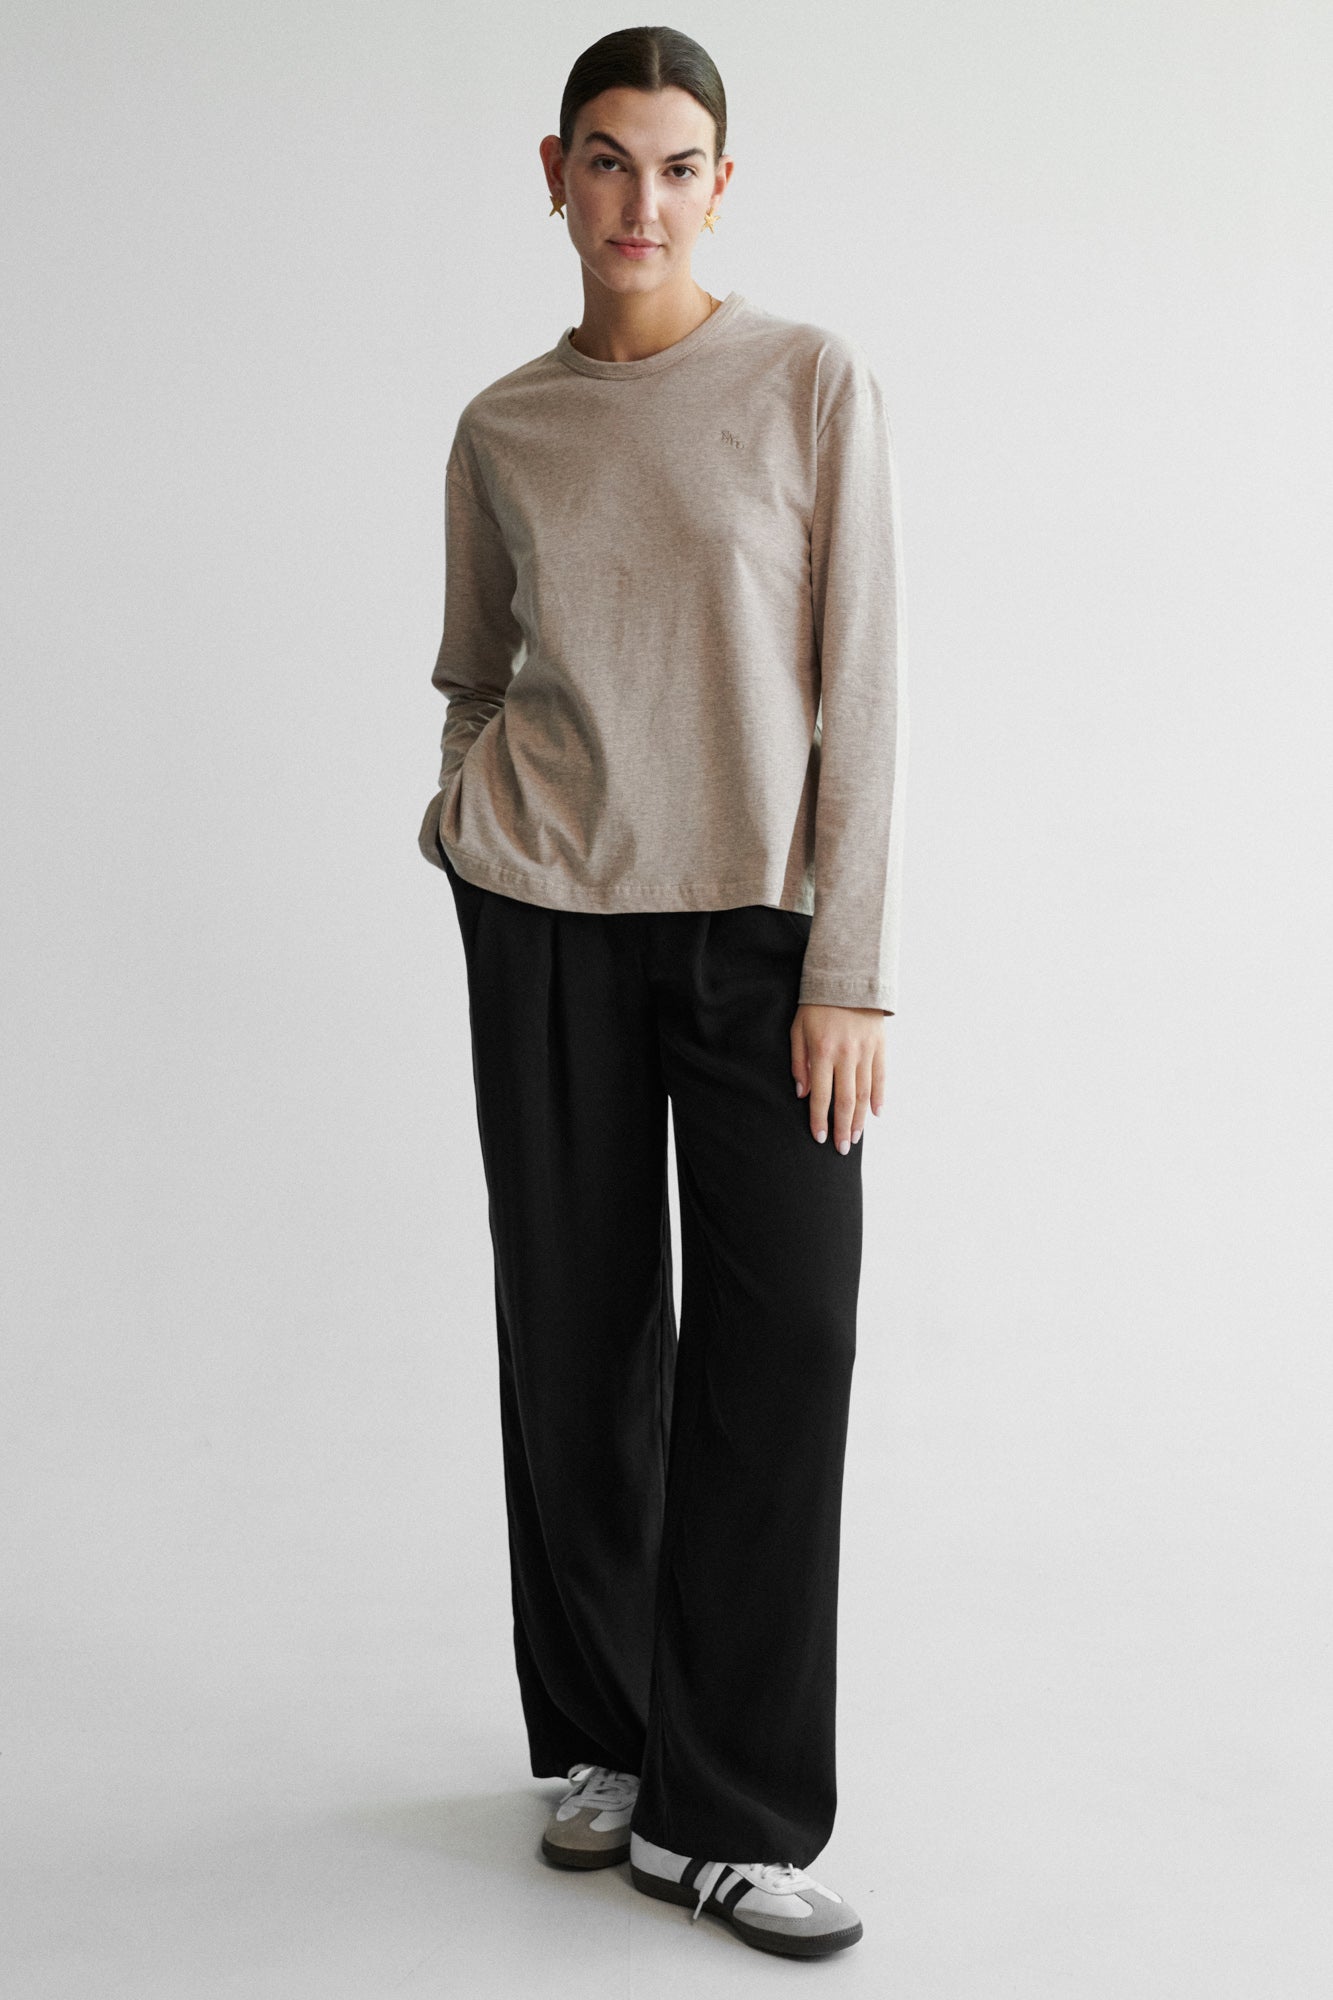 Longsleeve in cotton / 14 / 20 / cappuccino *tencel-trousers-05-02-onyx-black* ?The model is 178 cm tall and wears size XS/S?